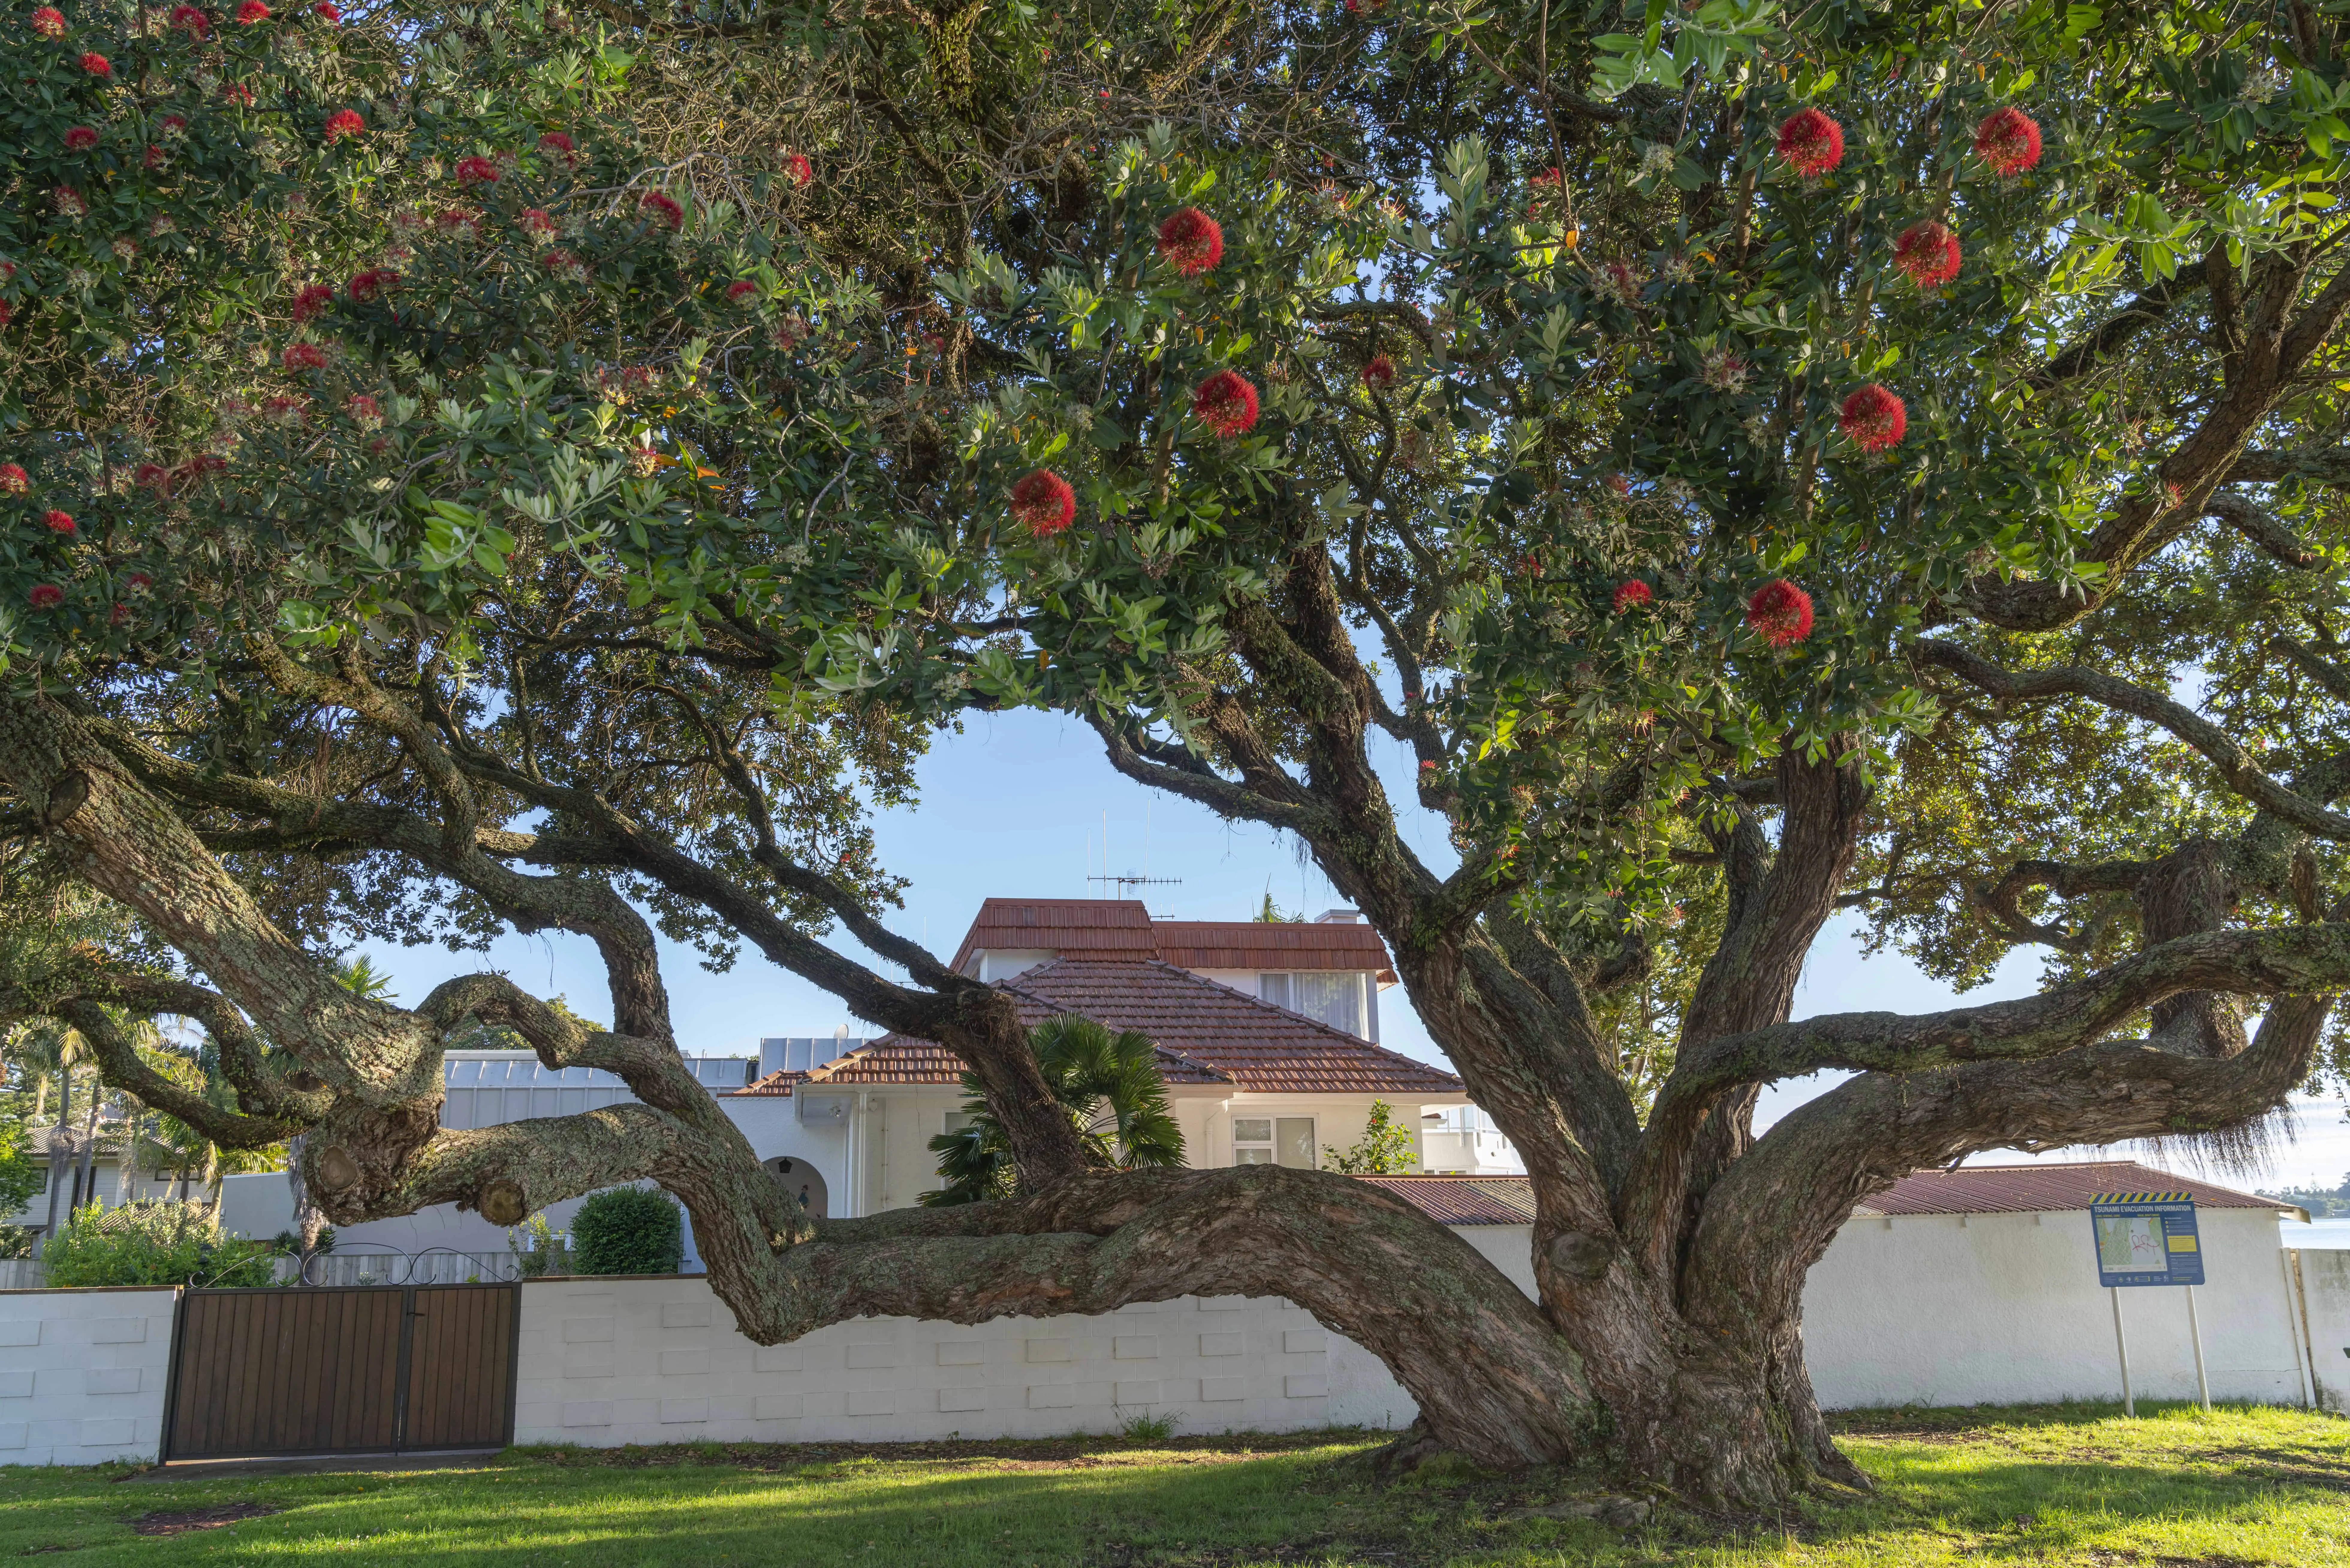 What Is The Pohutukawa Tree? (Explained)